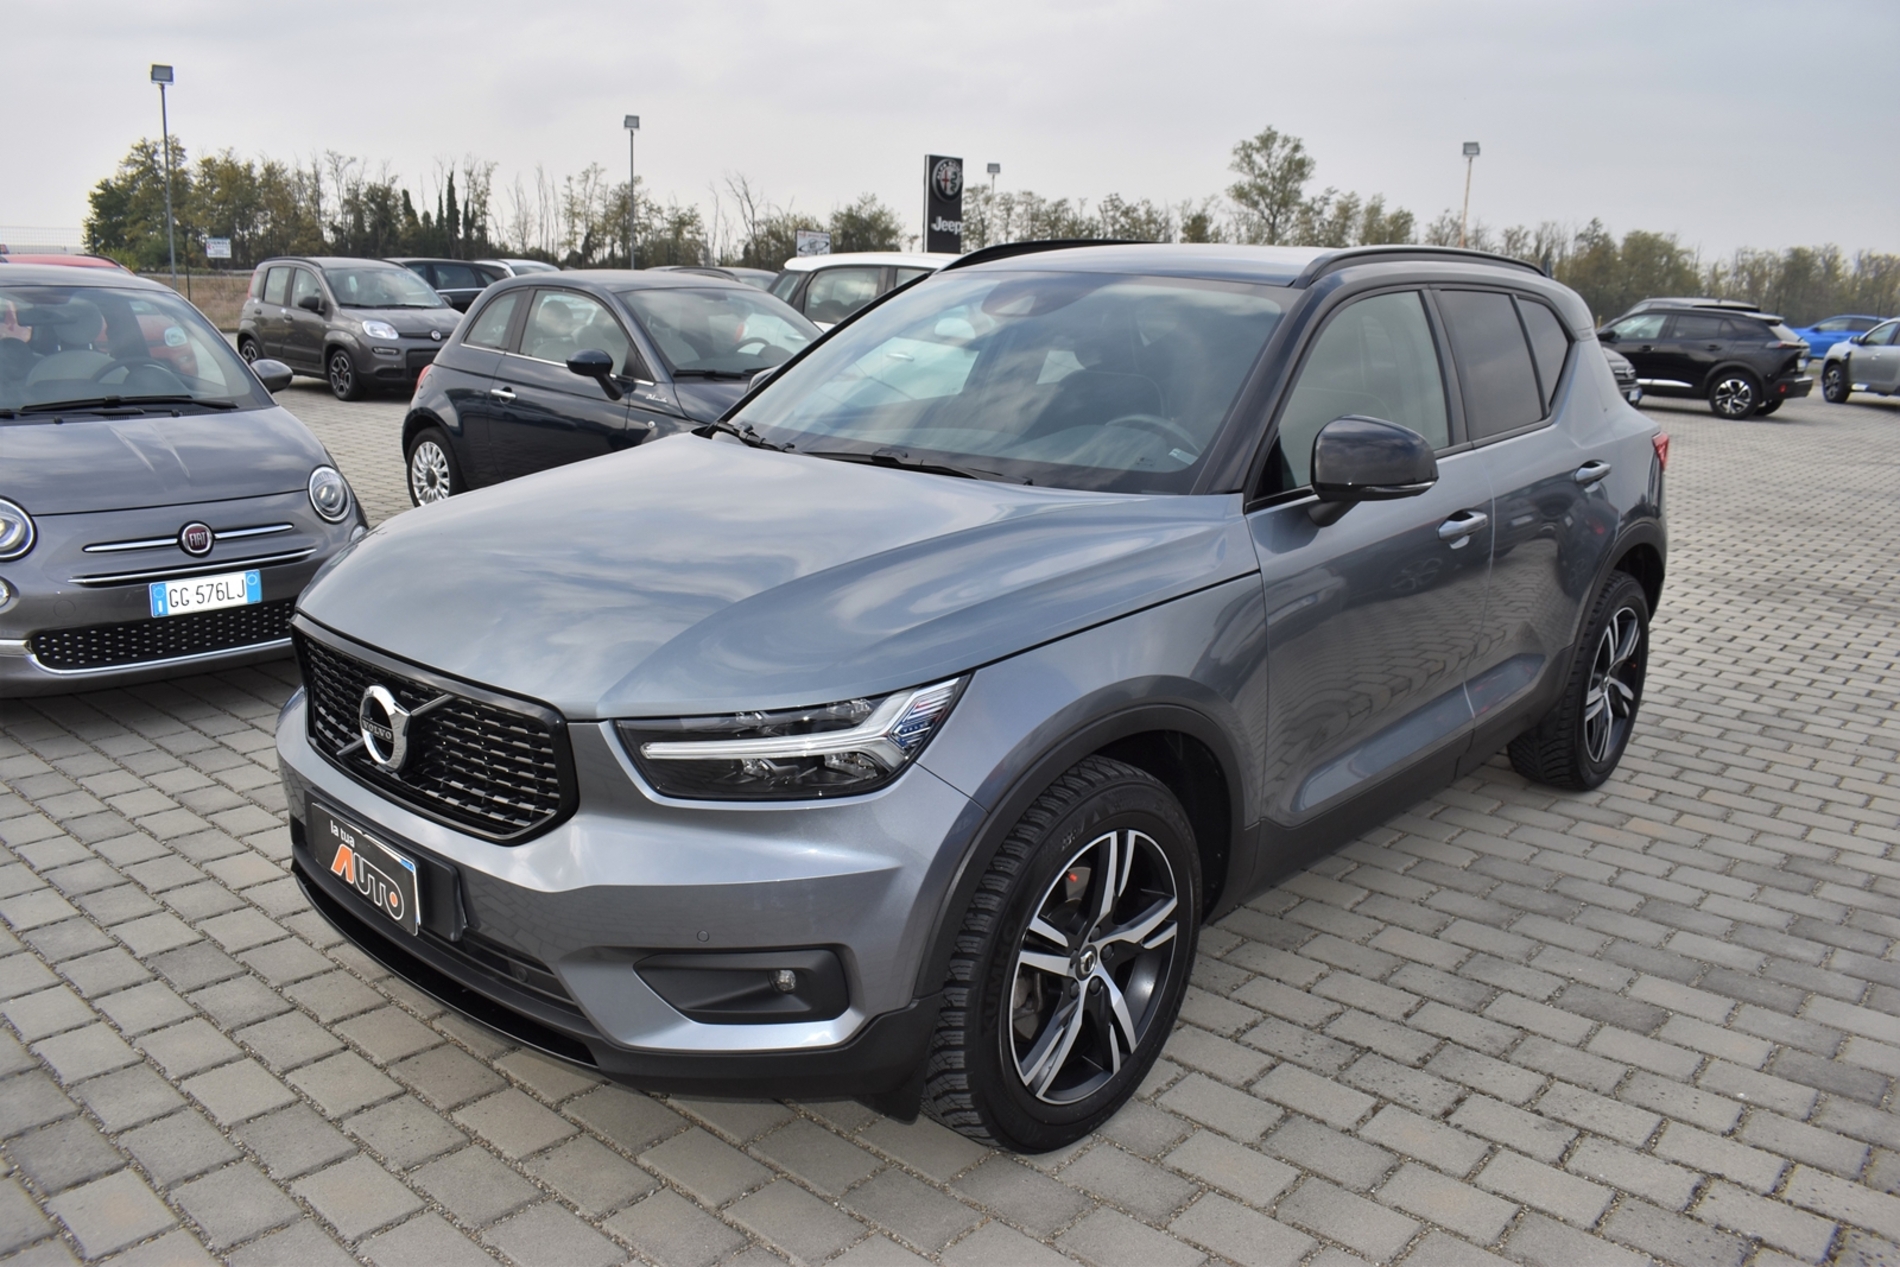 Volvo XC40 2.0 T5 R-design awd geartronic my20  